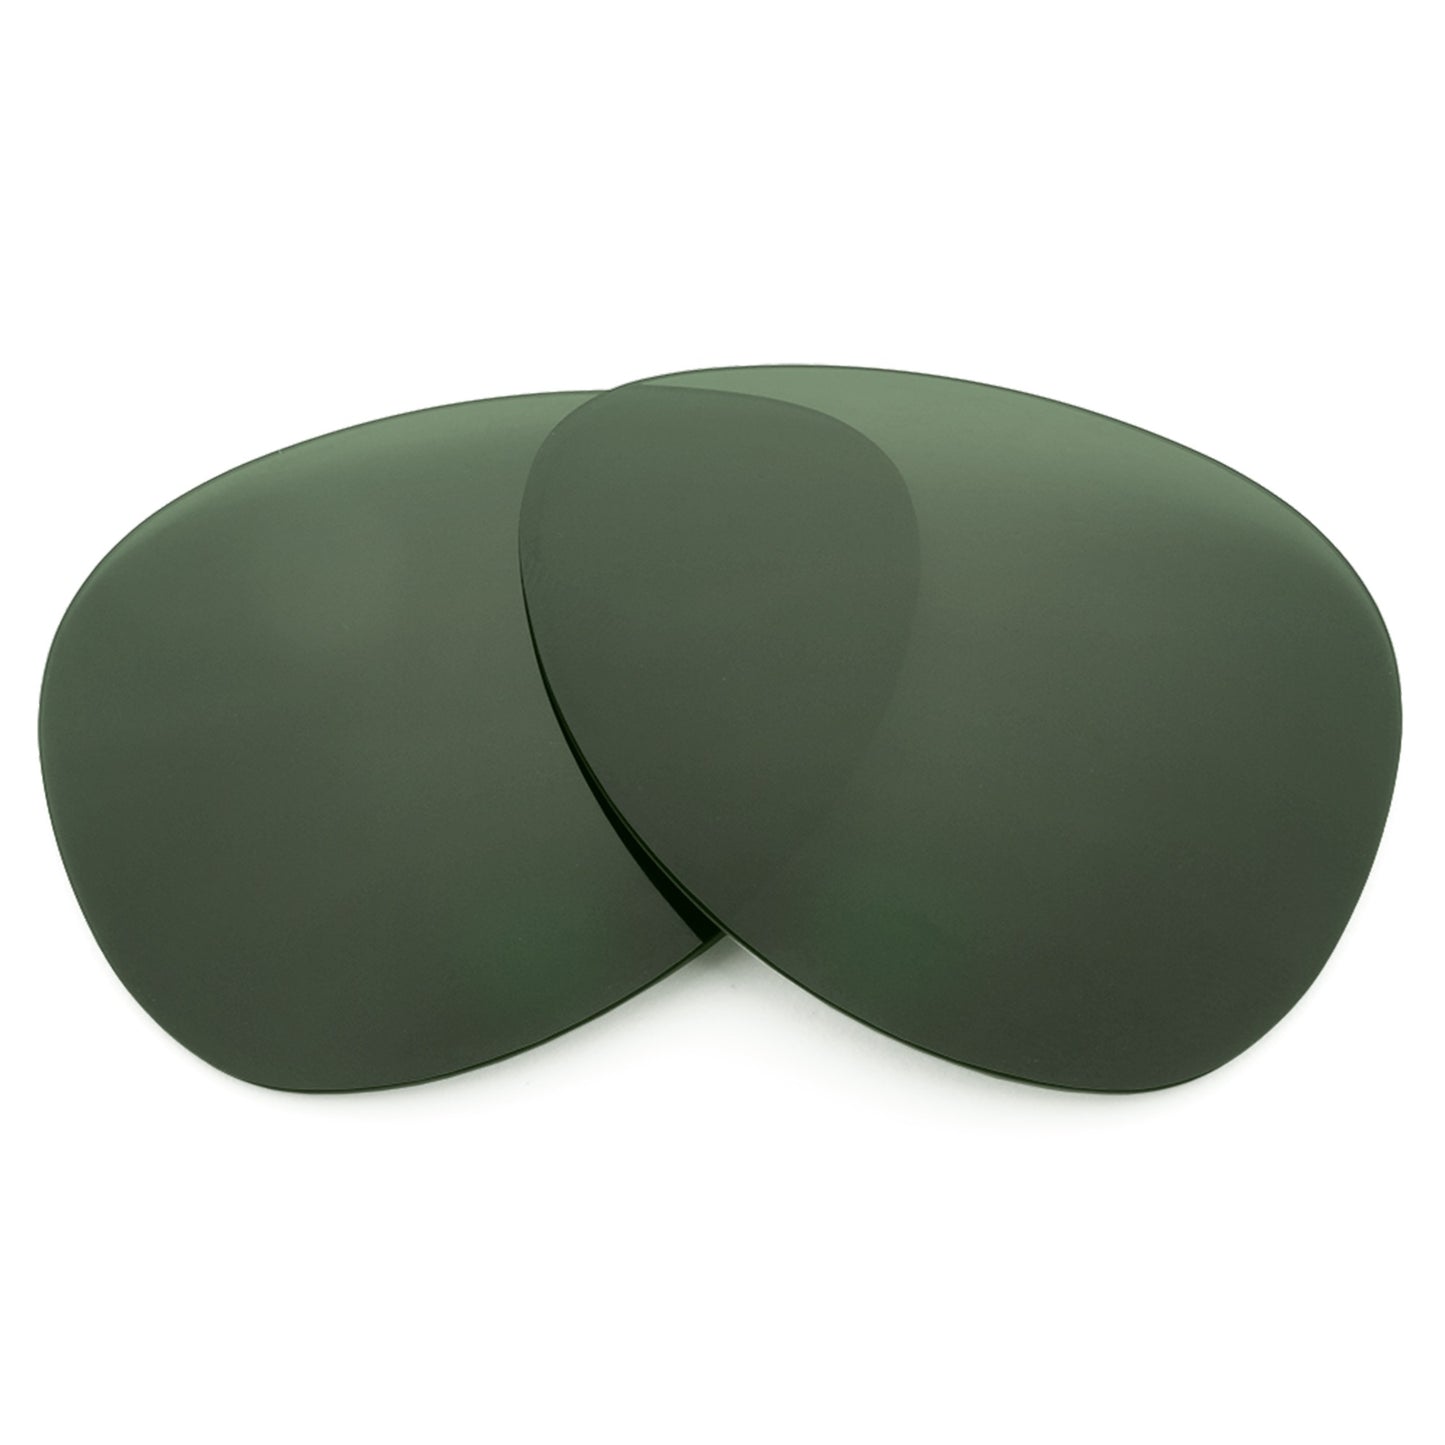 Revant replacement lenses for Ray-Ban Aviator Large Metal II RB3026 62mm Non-Polarized Gray Green